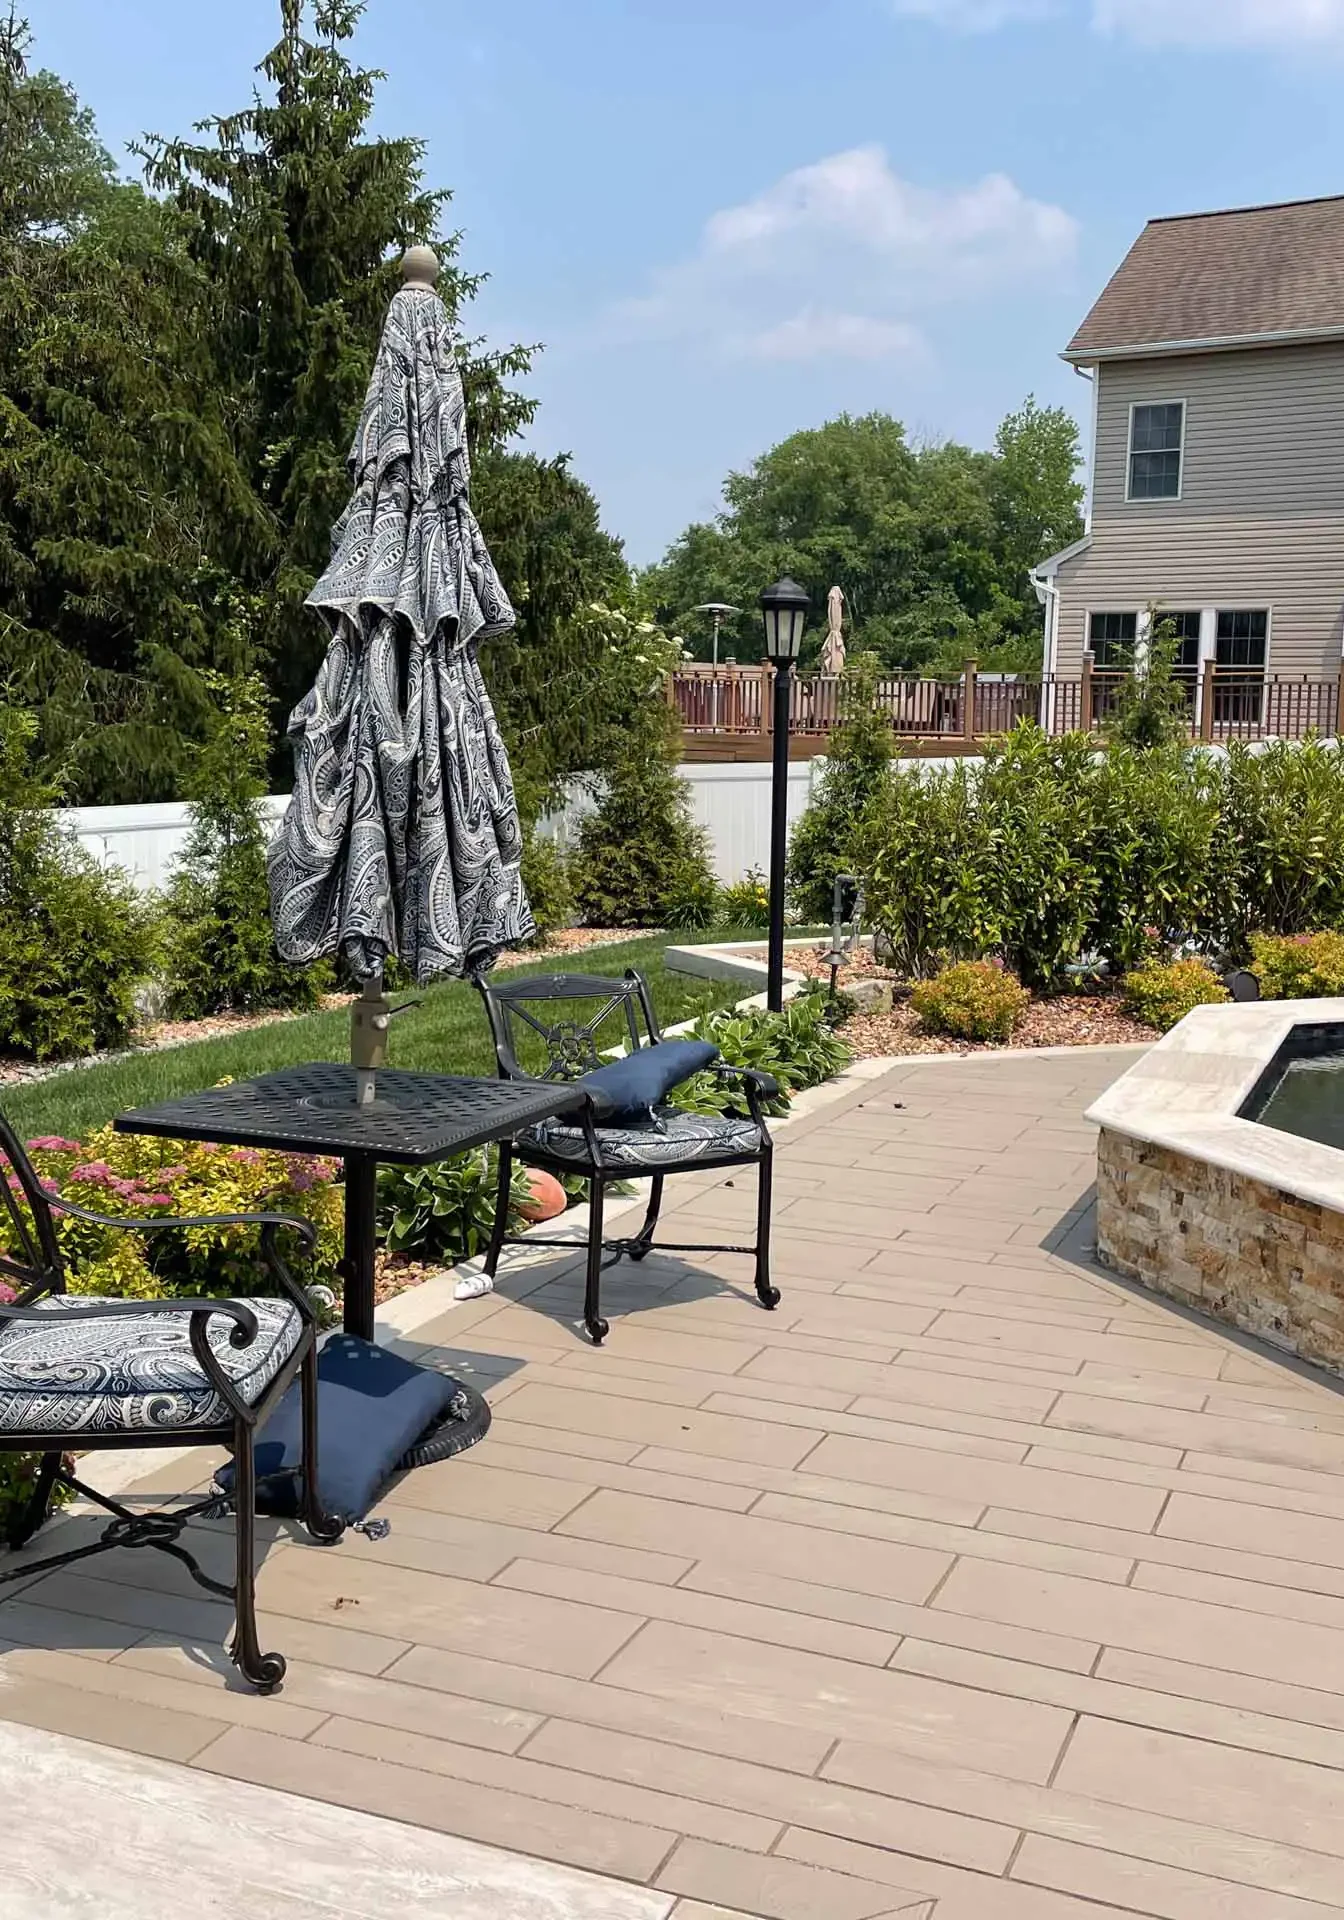 Manalapan Township, NJ Landscaping Services